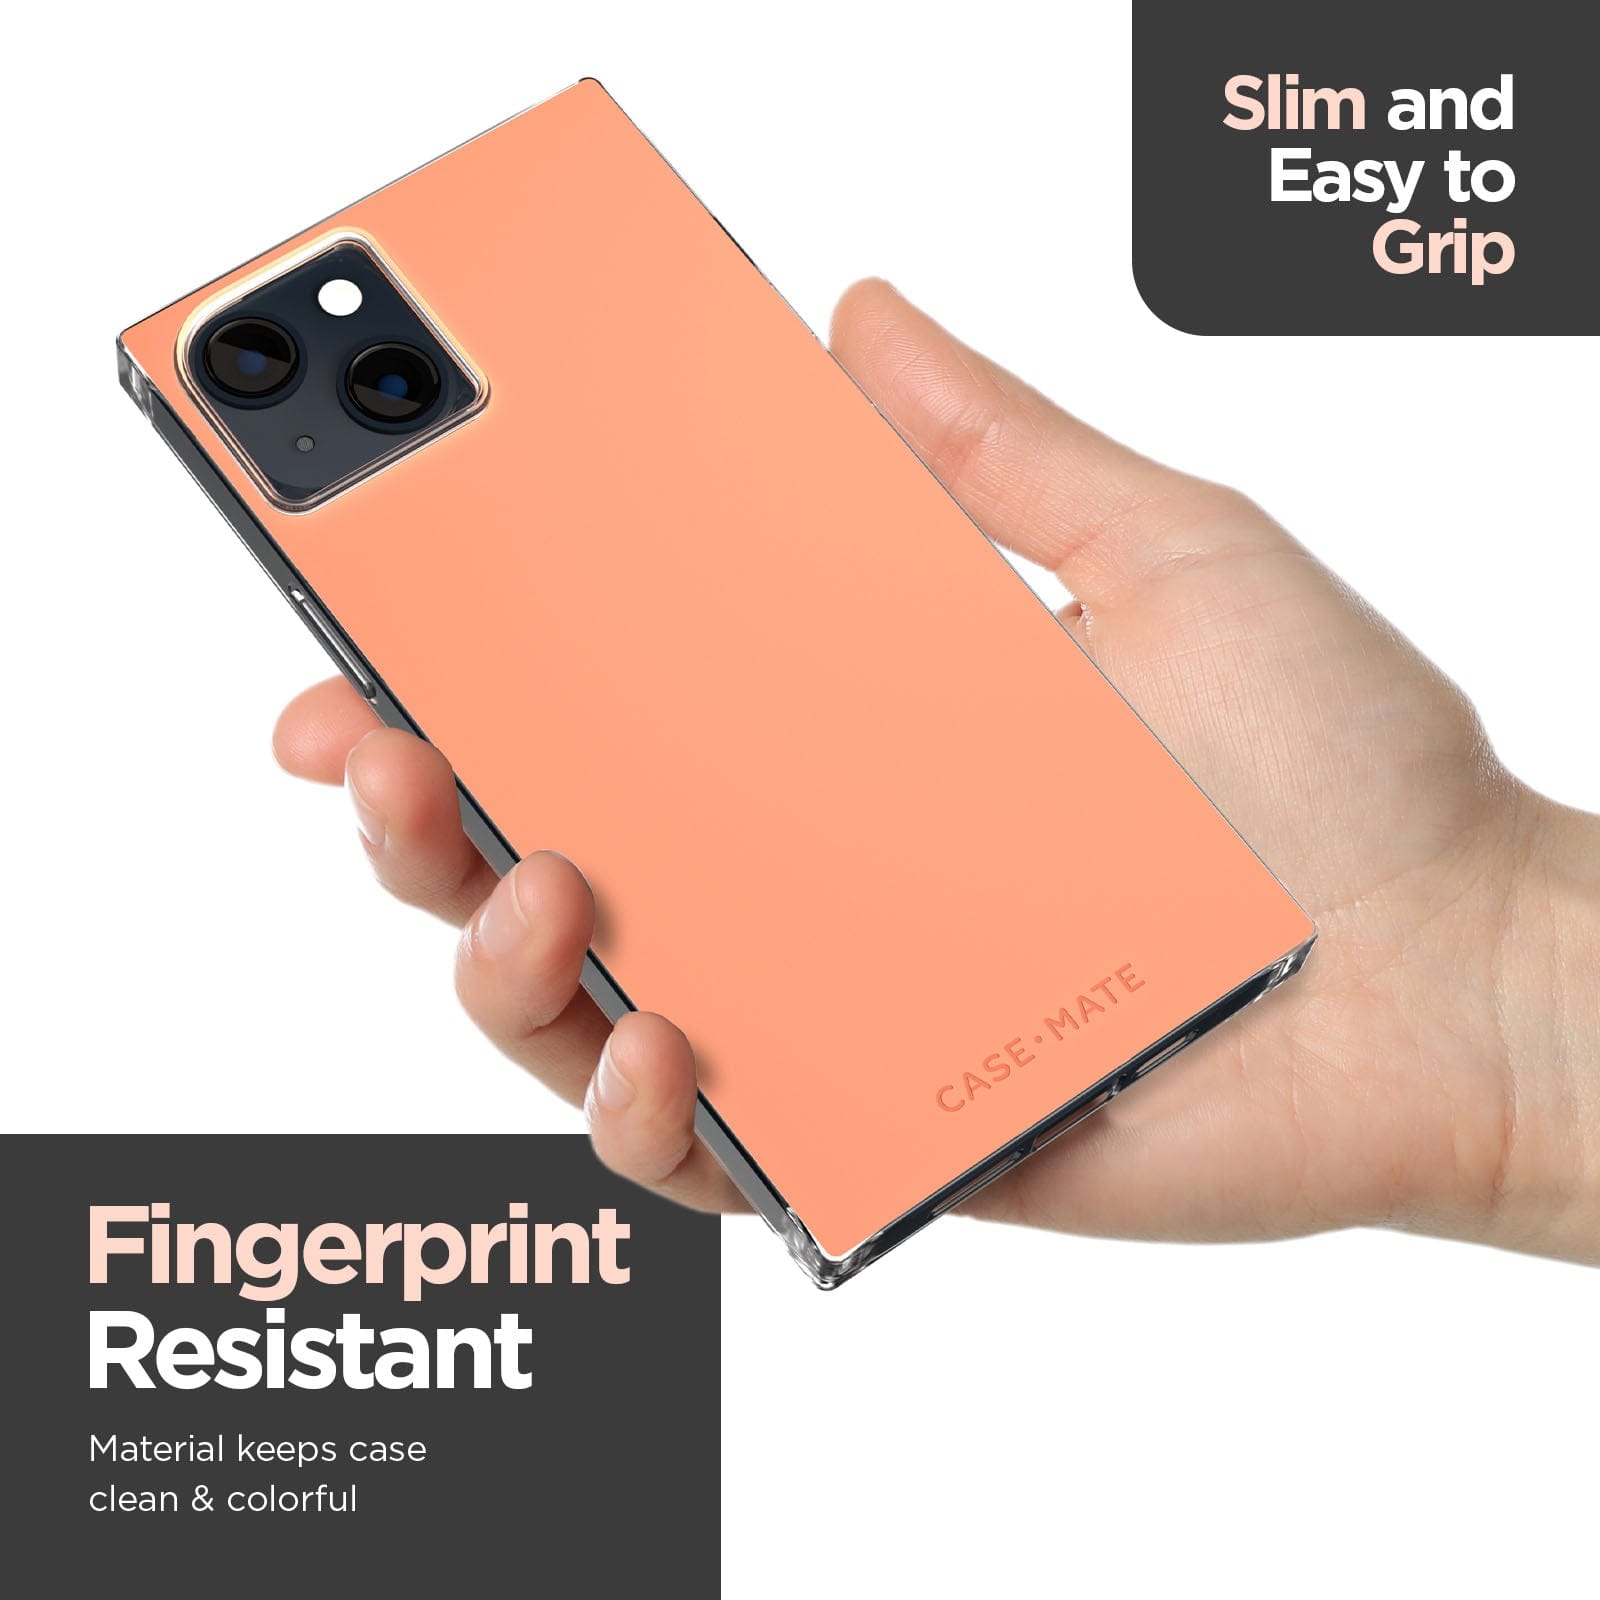 Slim and easy to grip. Fingerprint resistant materials keeps case clean & colorful. color::Clay Pink